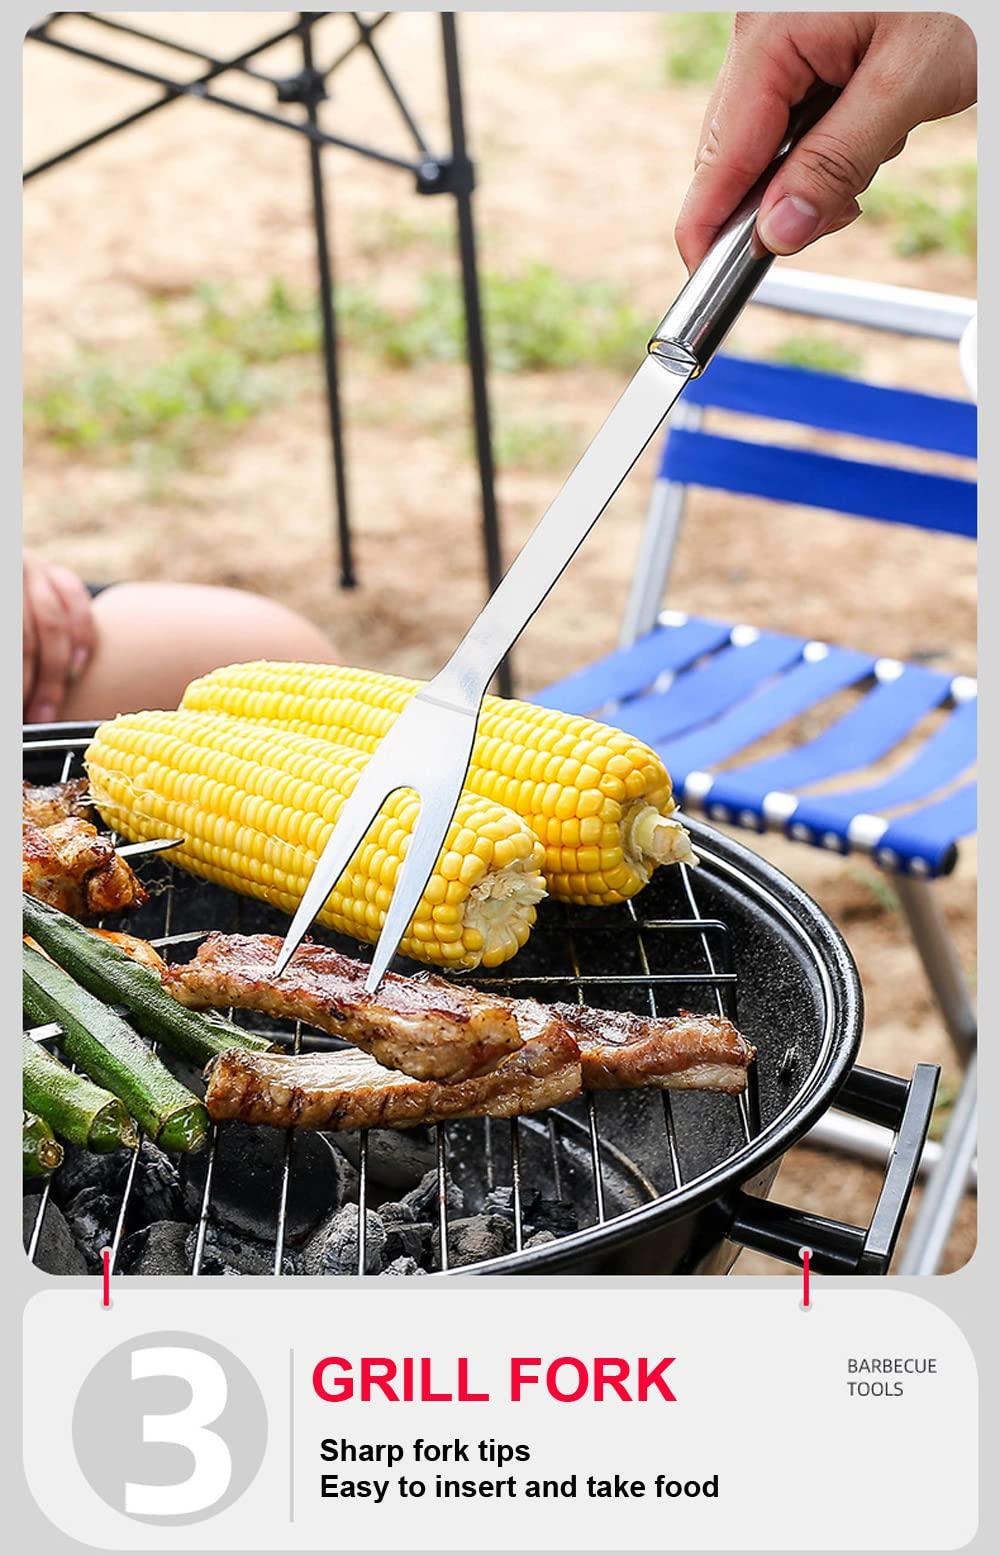 BBQ Grill BBQ Accessories, Stainless Steel Grill Tools Grilling Accessories Grill Set Barbecue Grill Accessories for Outdoor Grill, BBQ Tools Grill Utensils Grilling Tools - CookCave